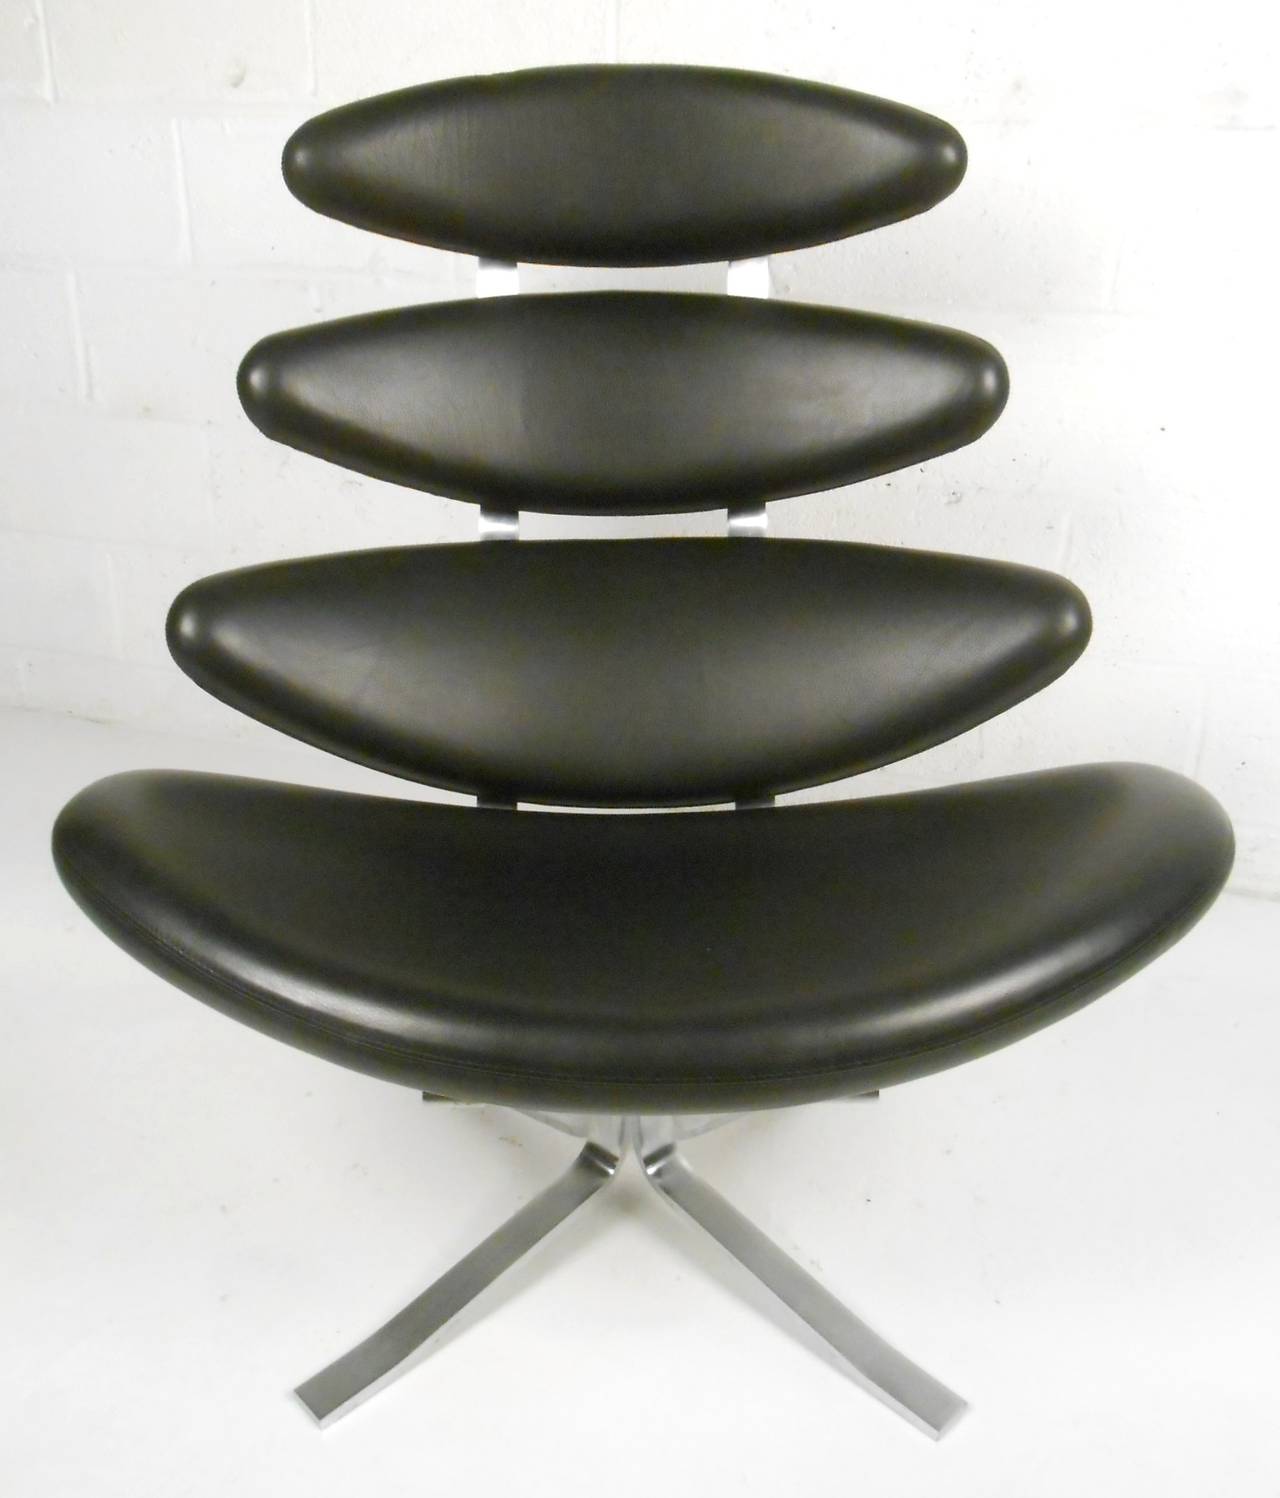 This unique midcentury Danish design makes a wonderful and eye-catching addition to any interior. Swivel leather lounge with sturdy, comfortable construction. Original manufacturer's label still in tact, please confirm item location (NY or NJ).